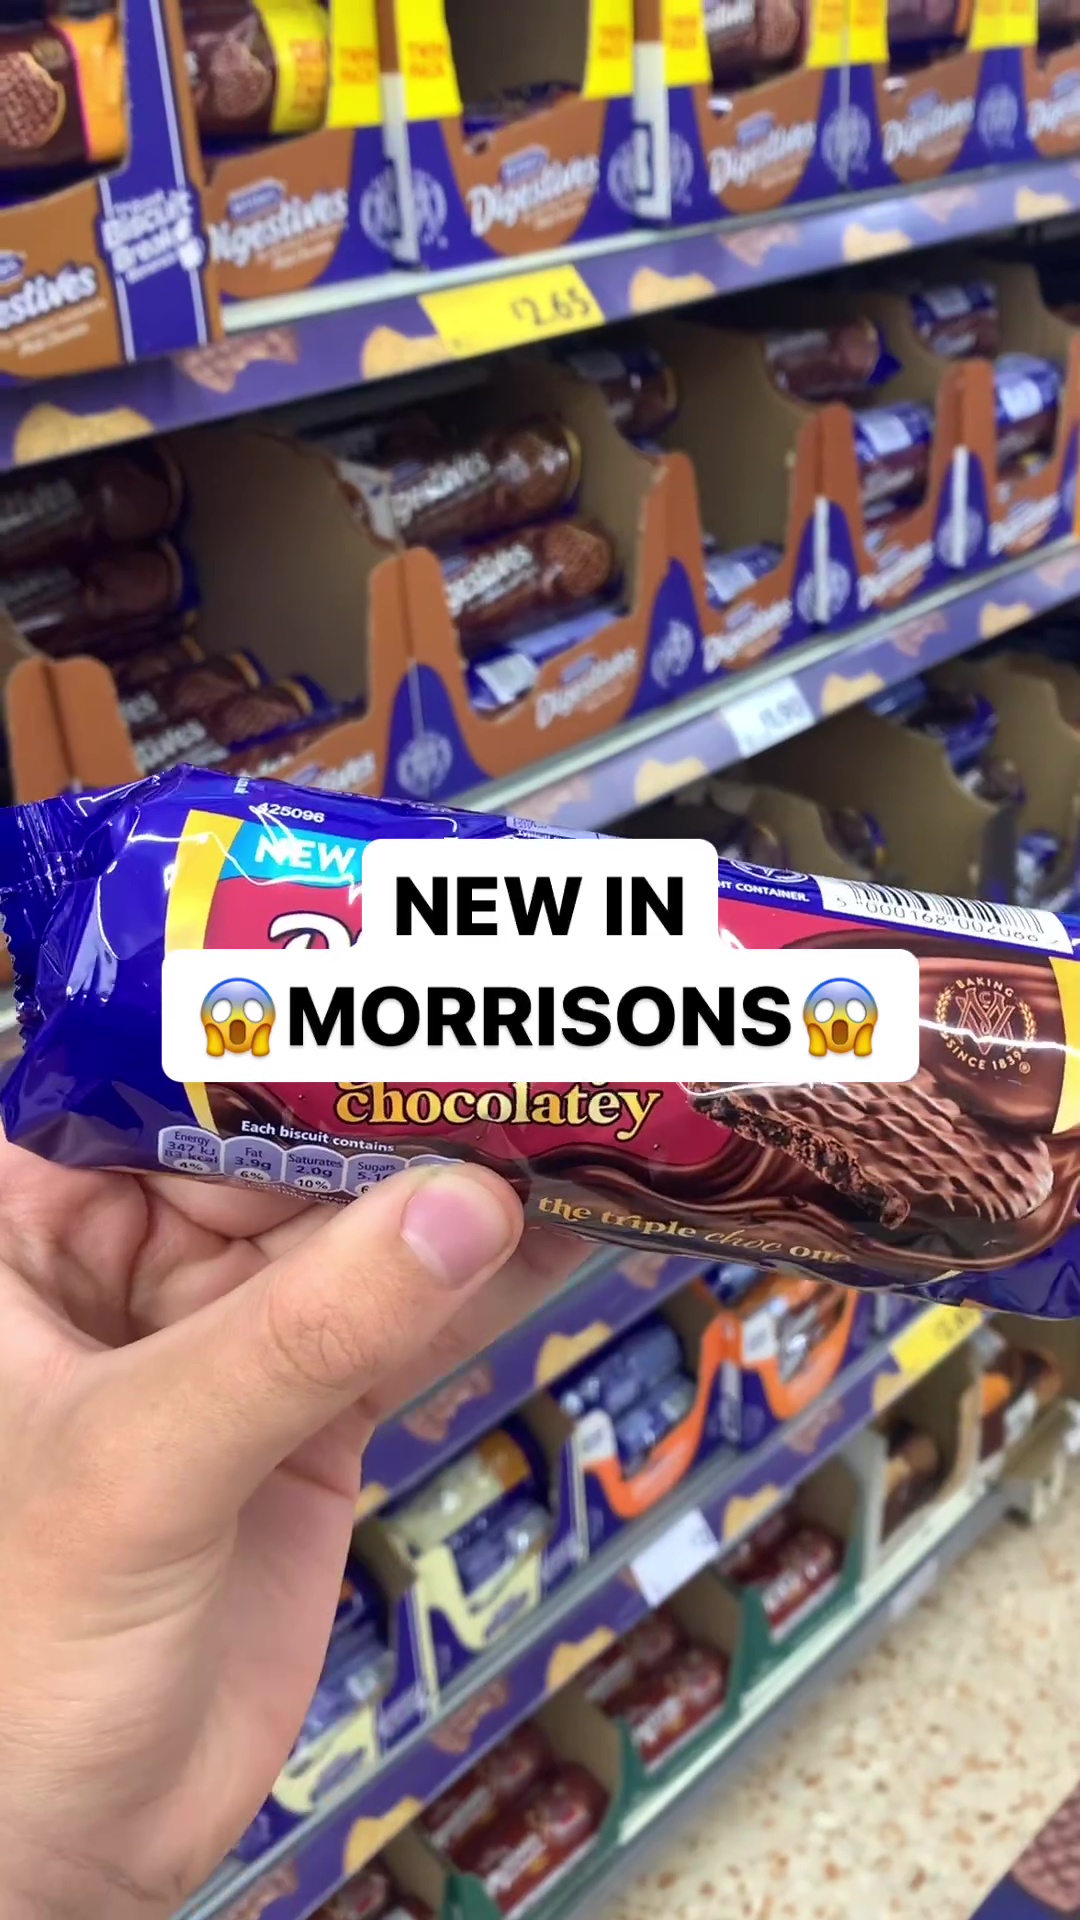 Chocolate lovers are already taking them off Morrisons shelves